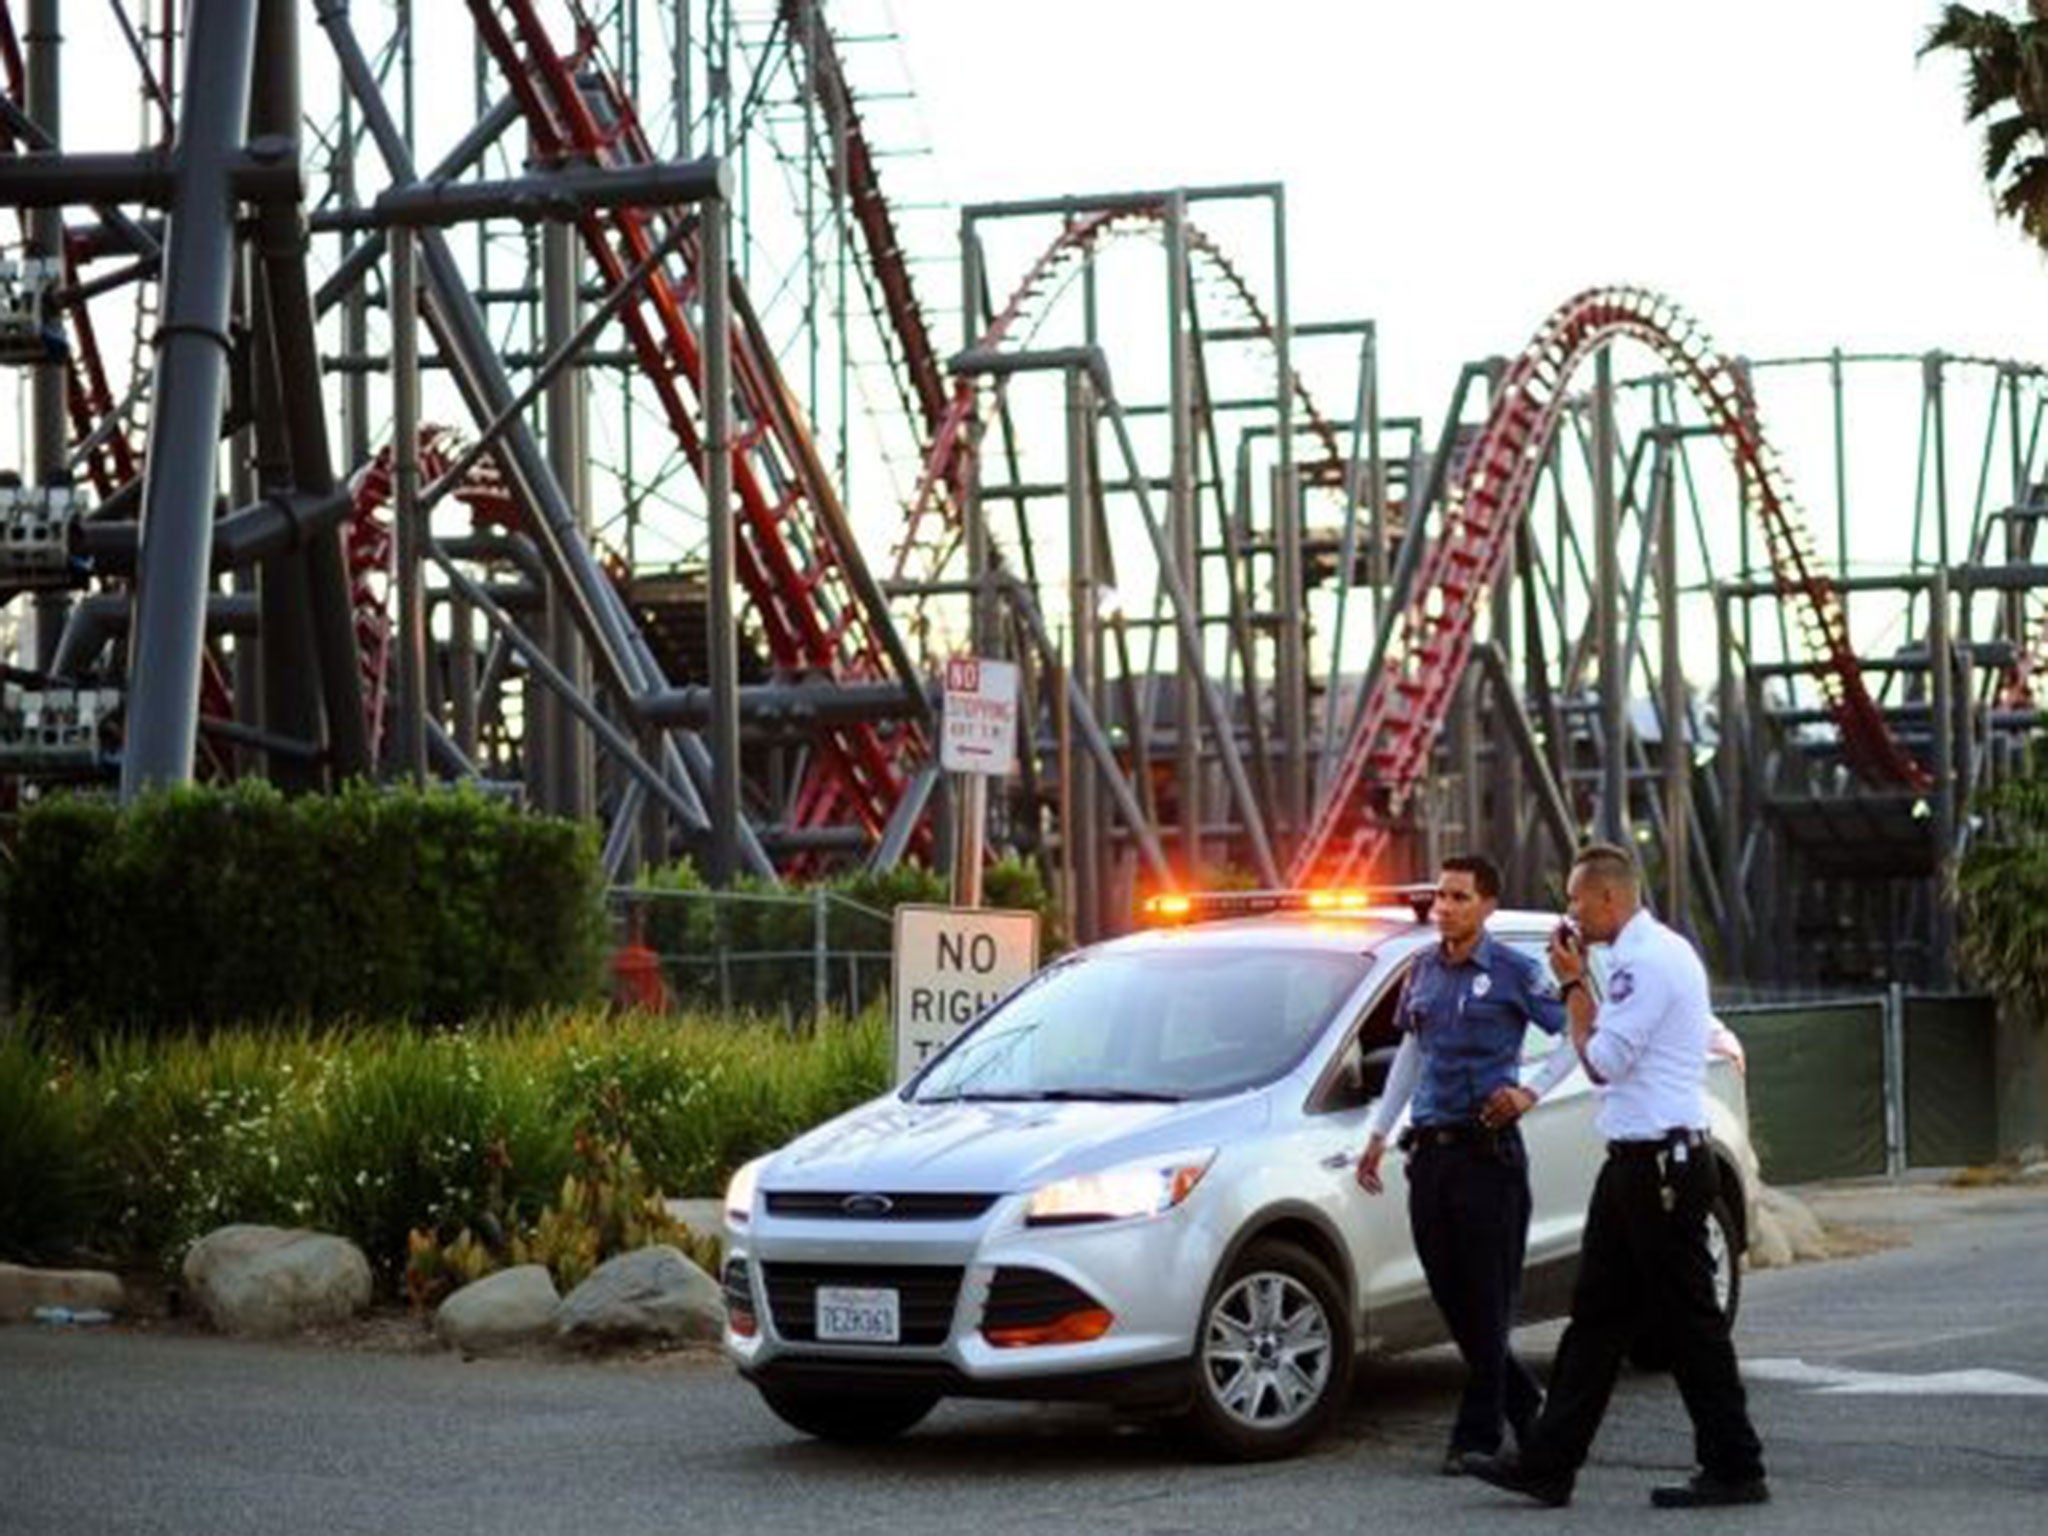 Members of the Six Flags Magic Mountain amusement park security staff monitor the situation at the exit of the park after riders were injured on the Ninja coaster Monday, July 7,